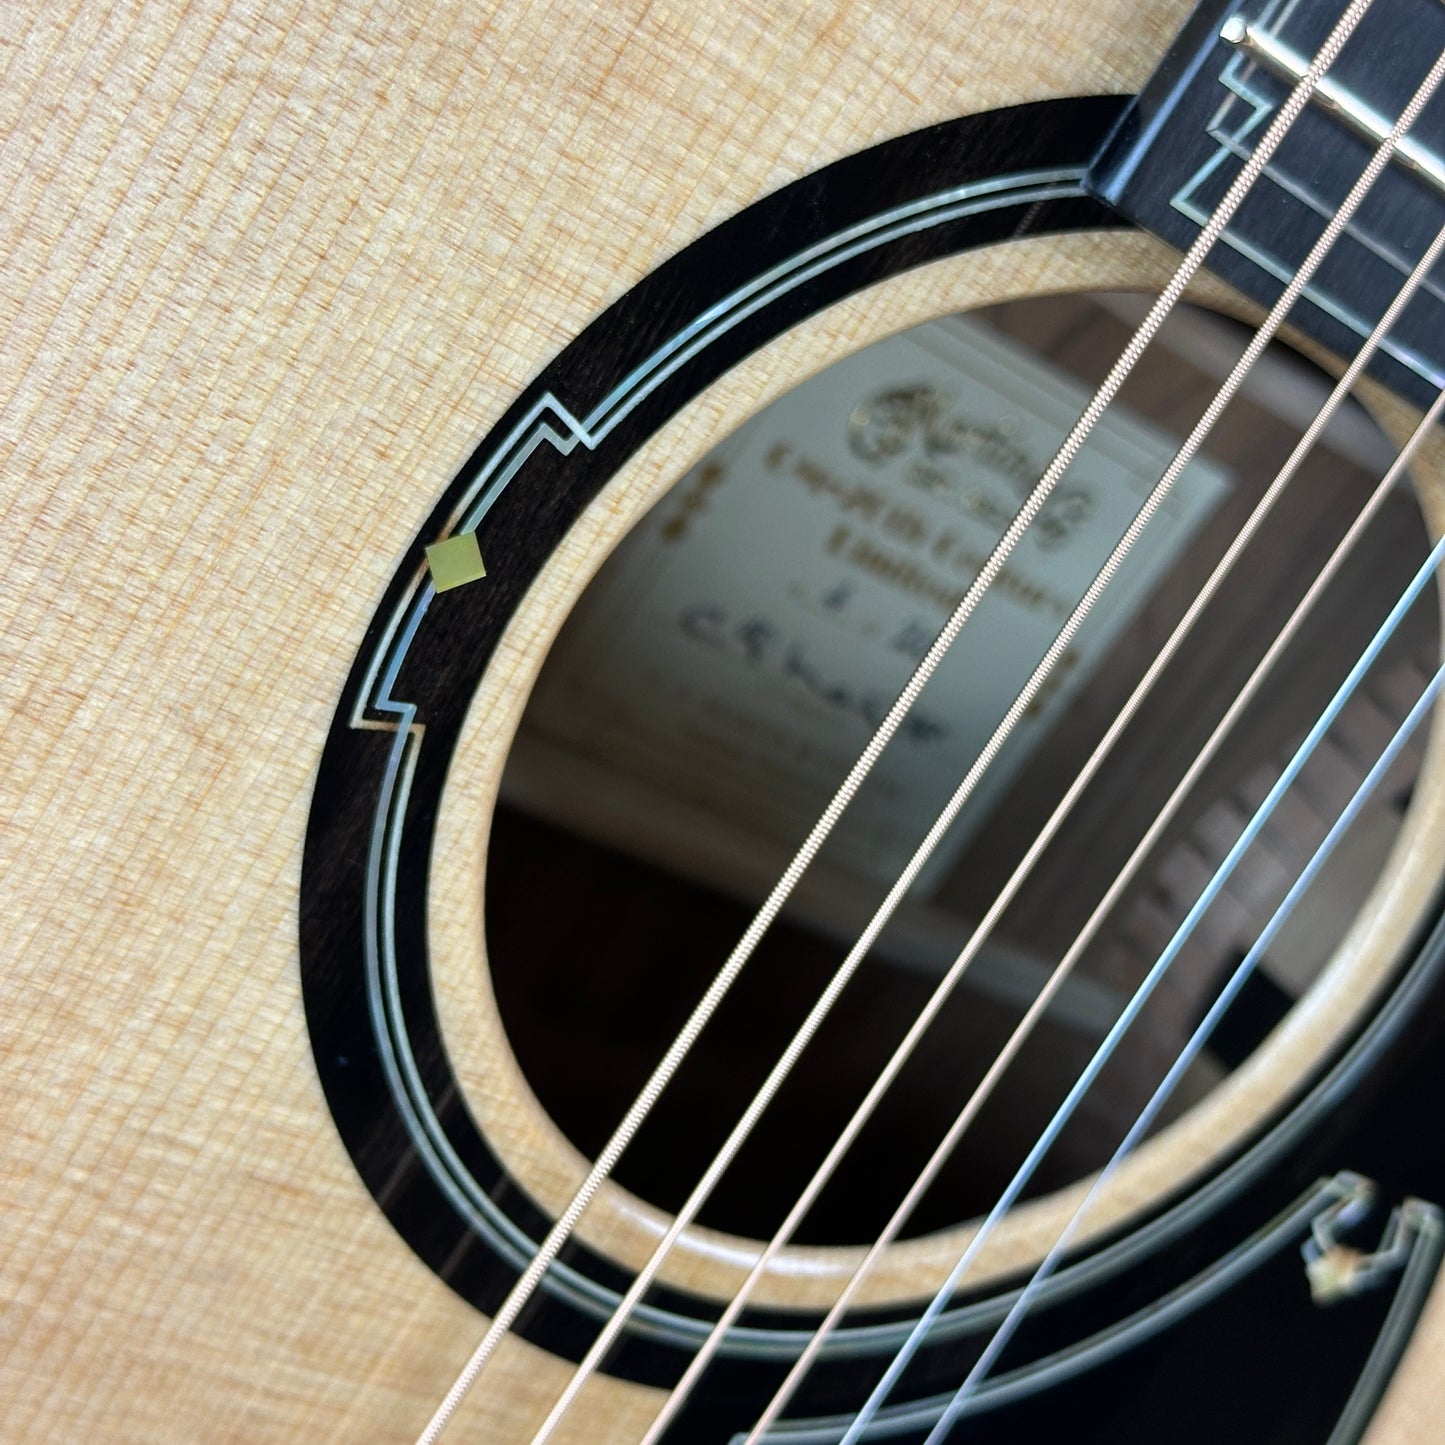 Soundhole of Martin OM 20th Century Limited.